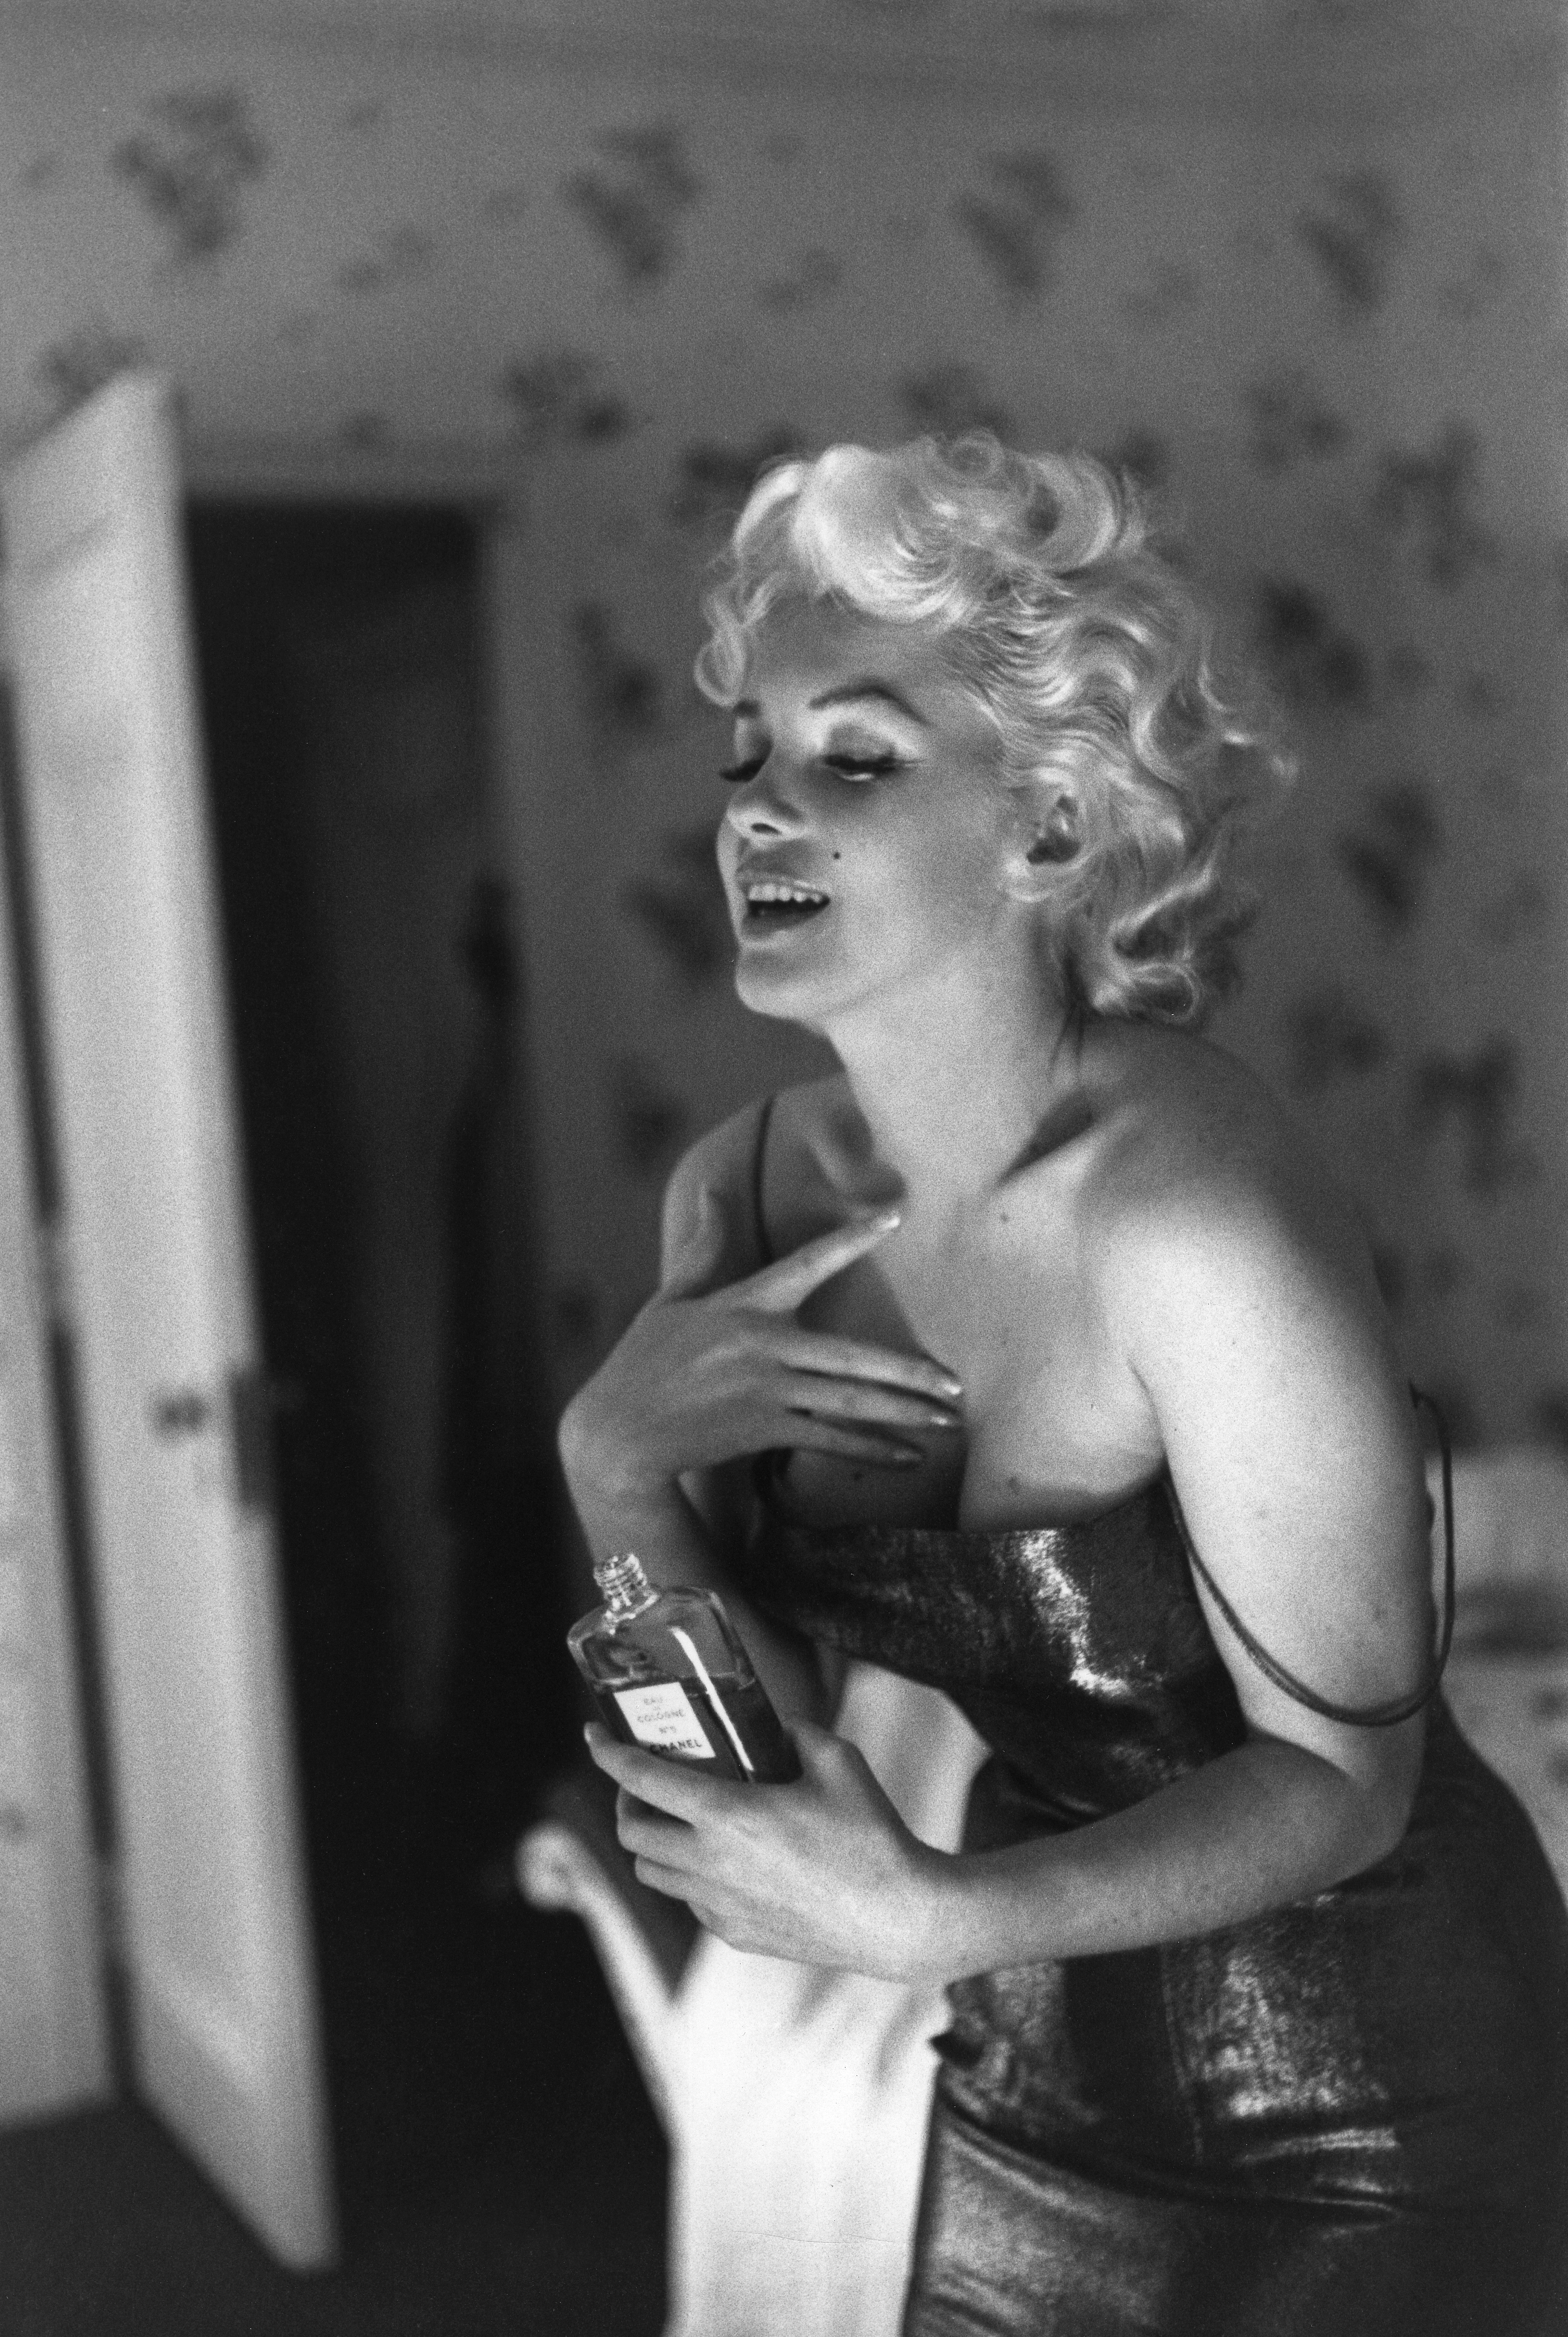 NEW YORK - MARCH 24: Actress Marilyn Monroe gets ready to go see the play "Cat On A Hot Tin Roof" playfully applying her make up and Chanel No. 5 Perfume on March 24, 1955 at the Ambassador Hotel in New York City, New York. (Photo by Ed Feingersh/Michael  (Foto: Reprodução)